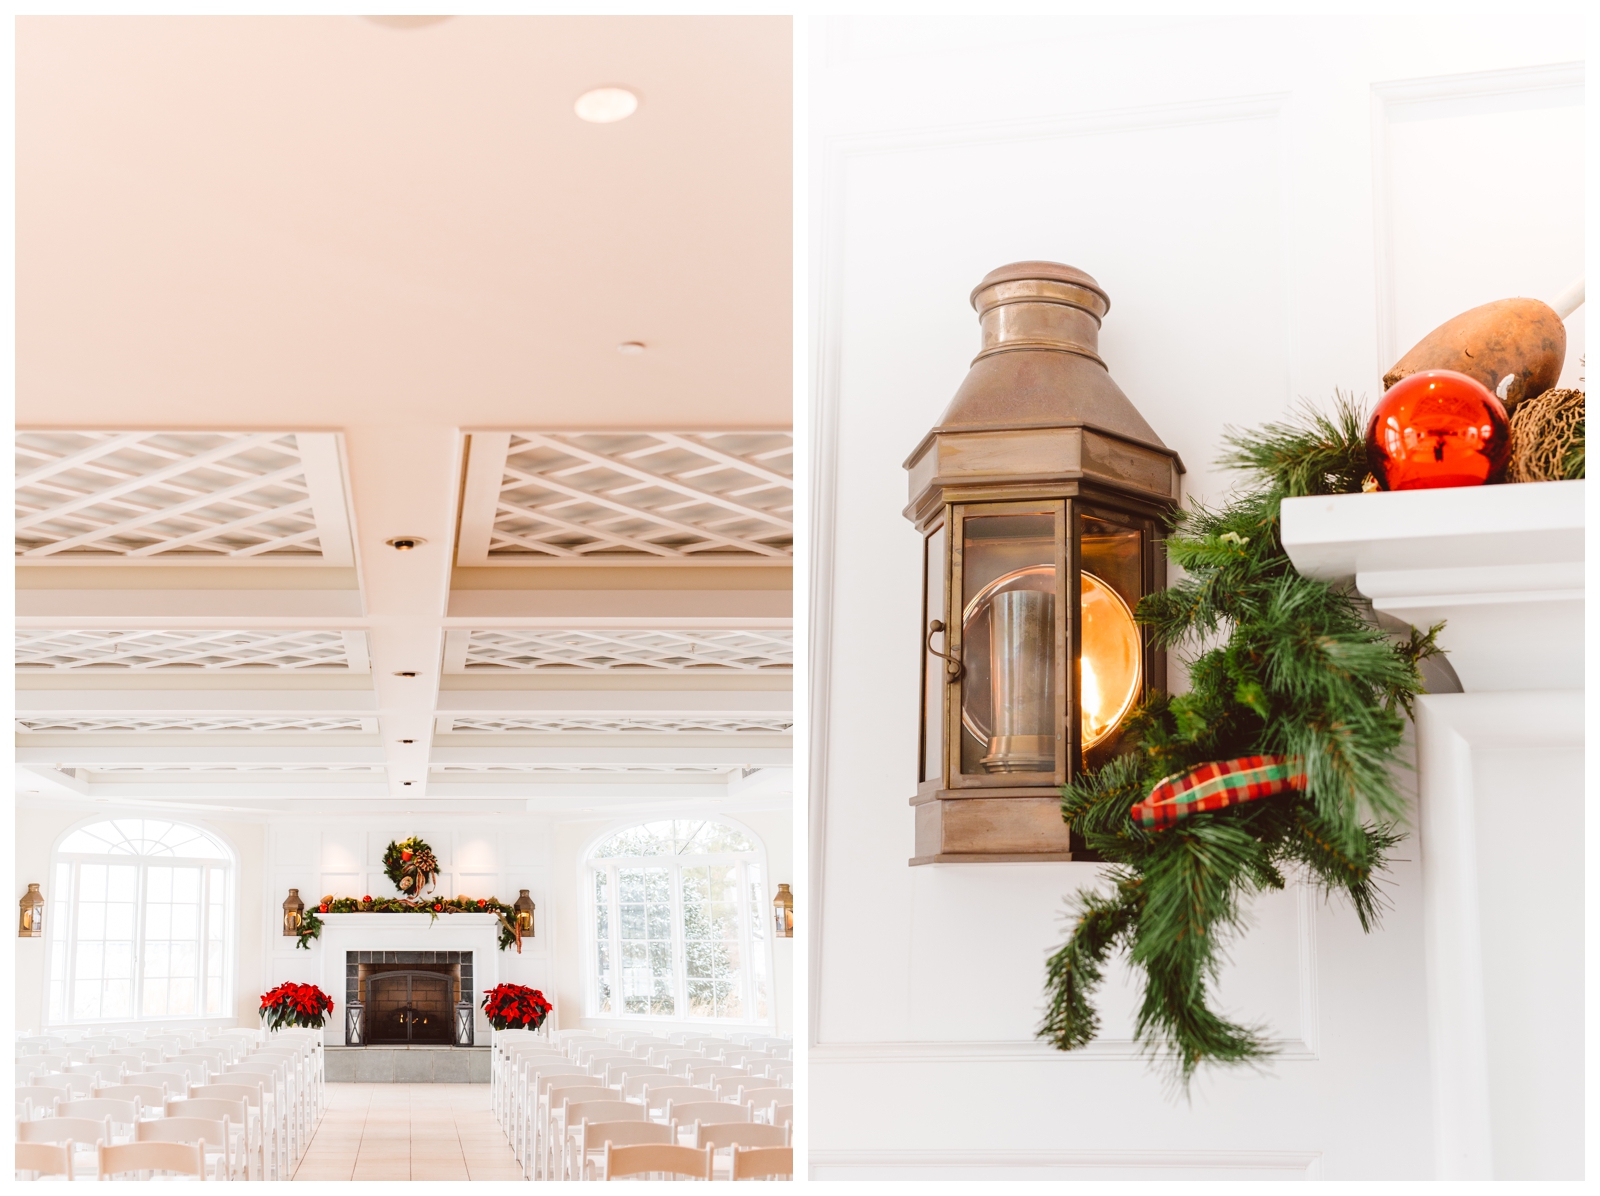 Romantic Snowy Wedding Day Inspiration at The Chesapeake Bay Beach Club - Brooke Michelle Photography